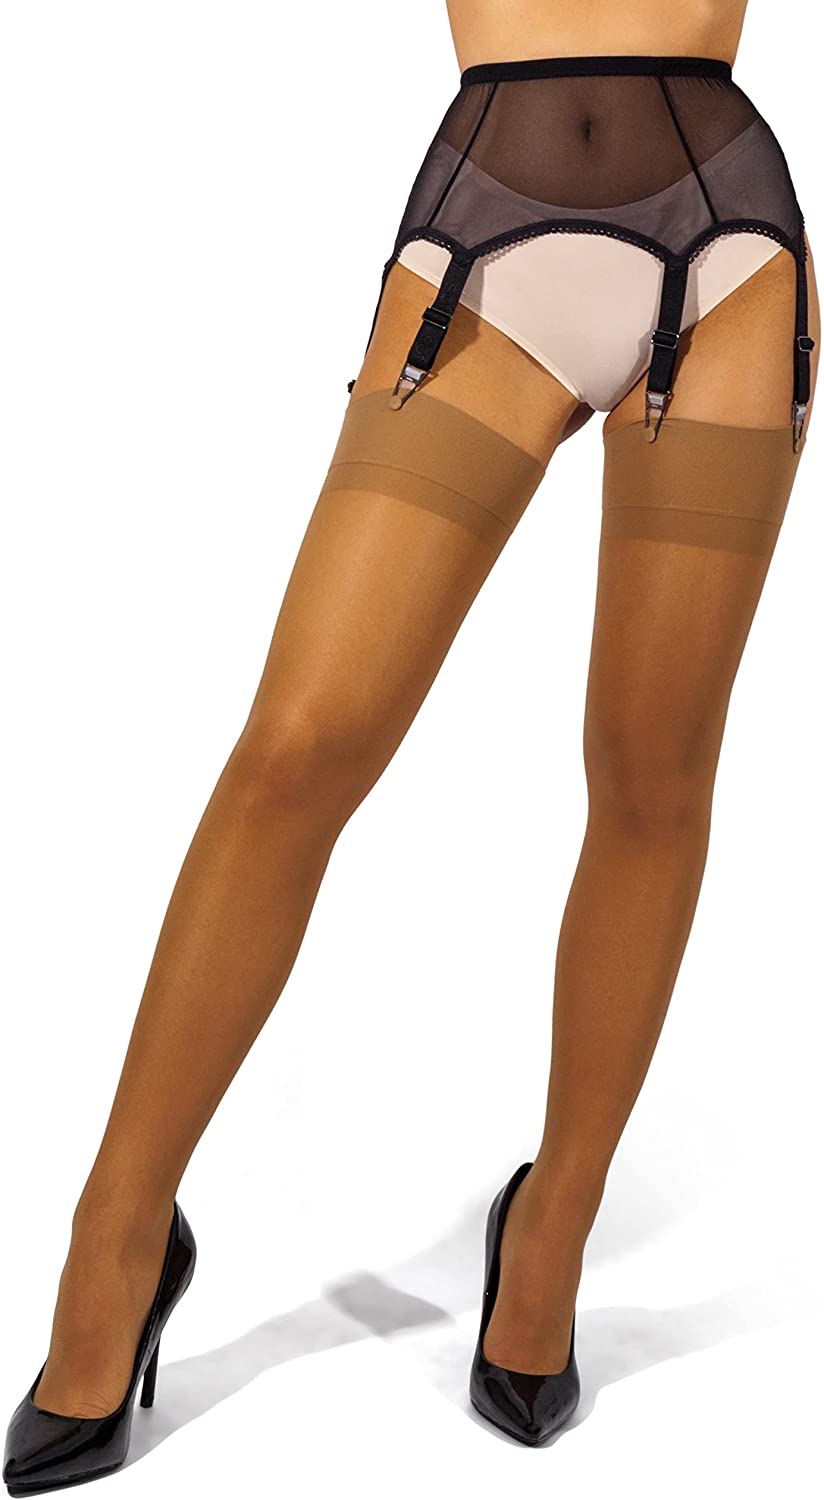 Pantyhose Lingerie Nylons